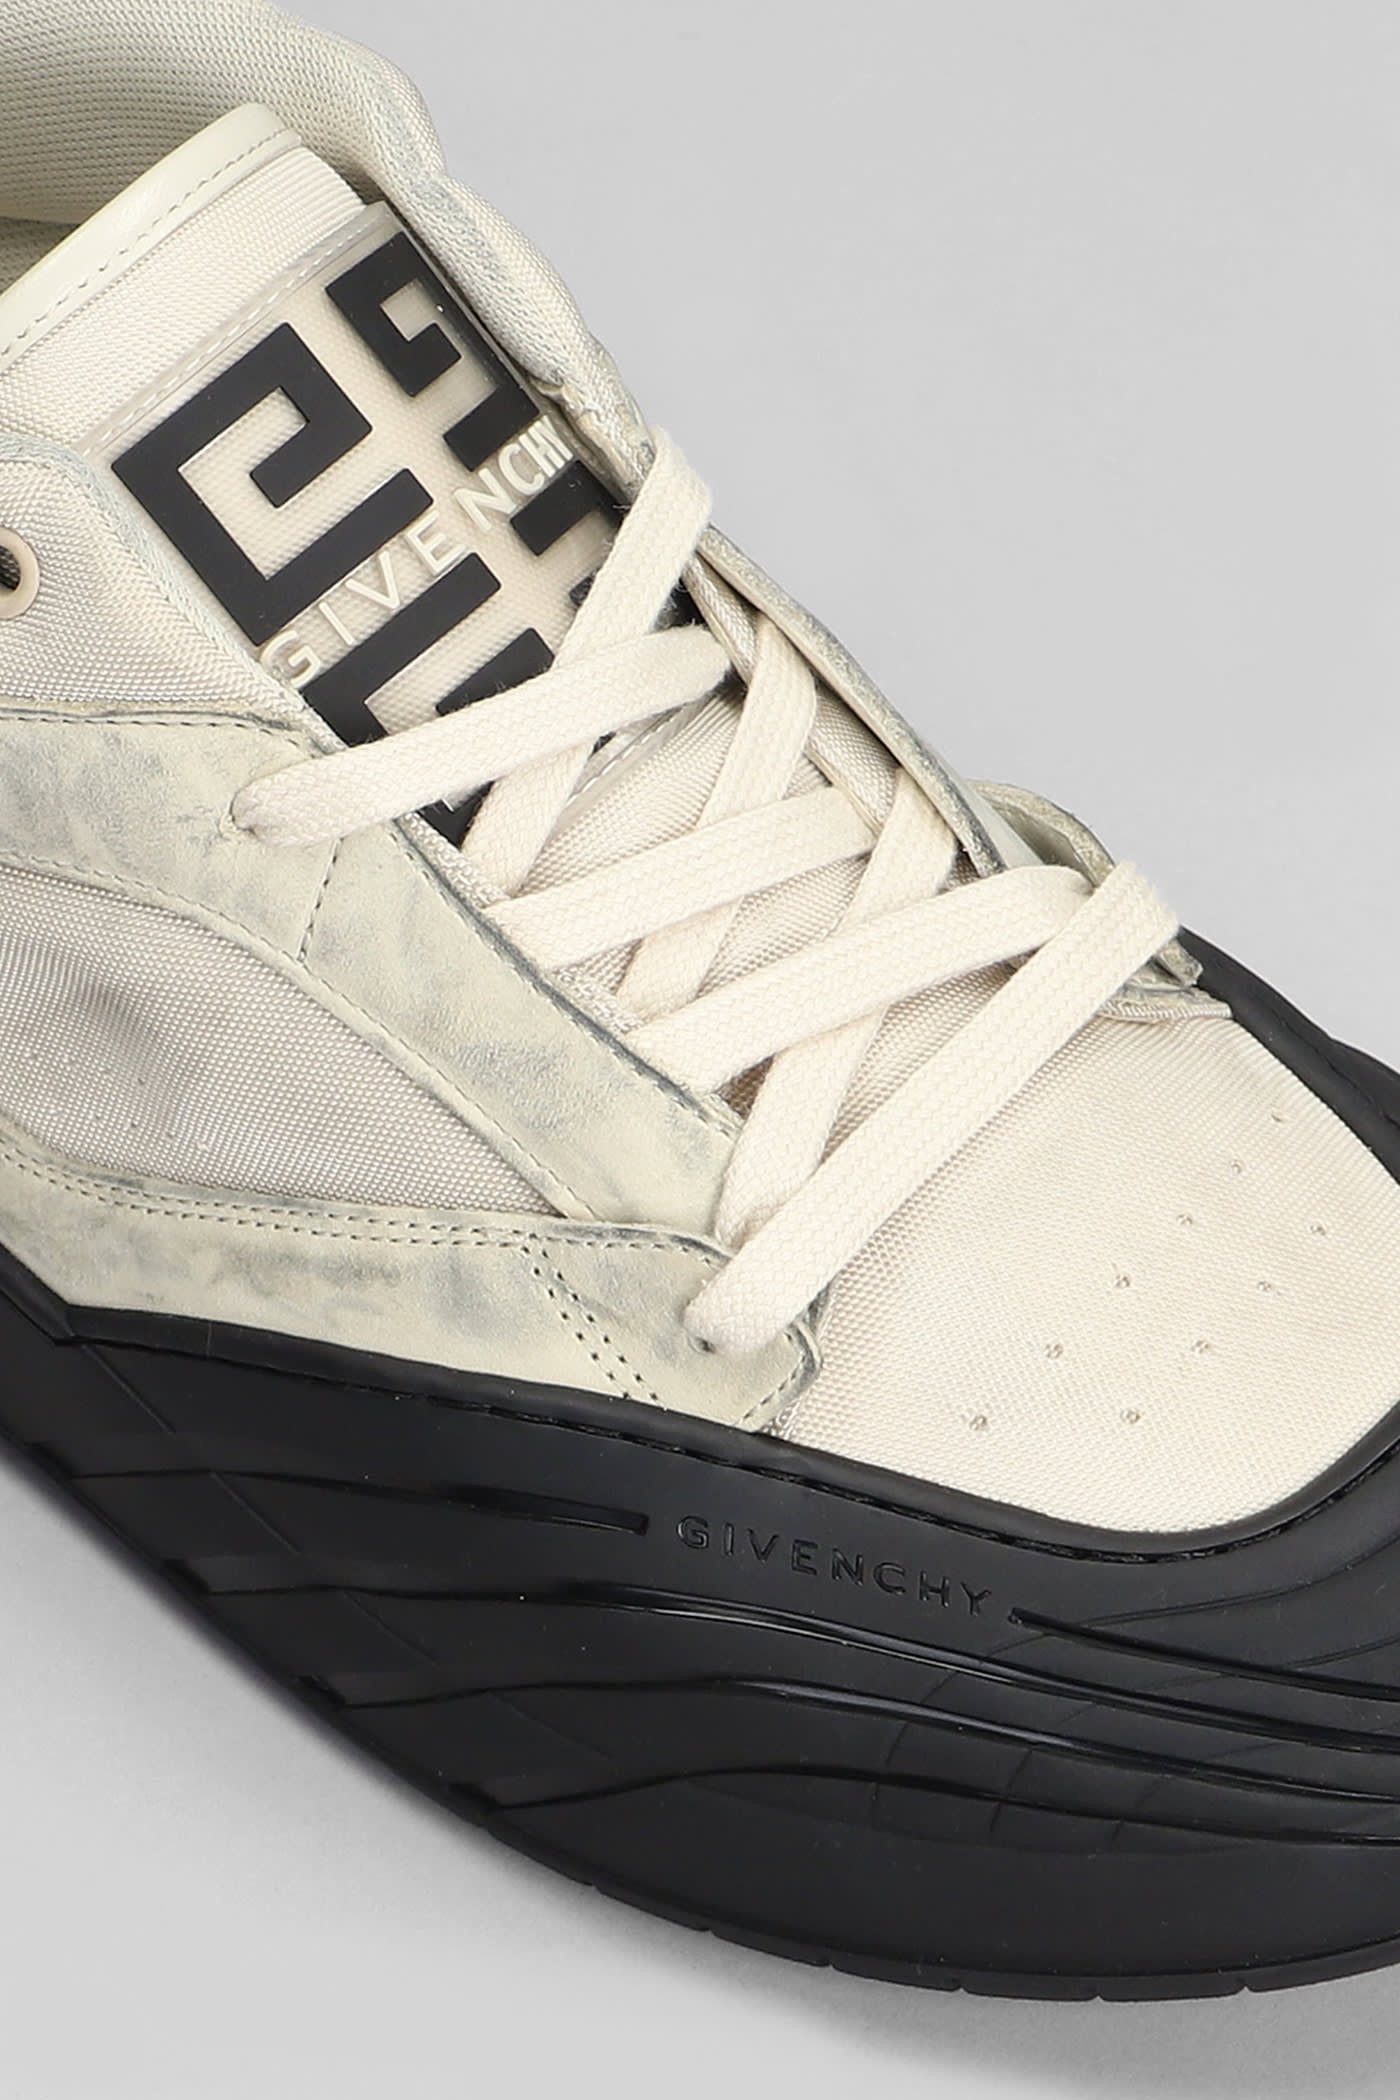 Shop Givenchy Sneakers In Beige Leather